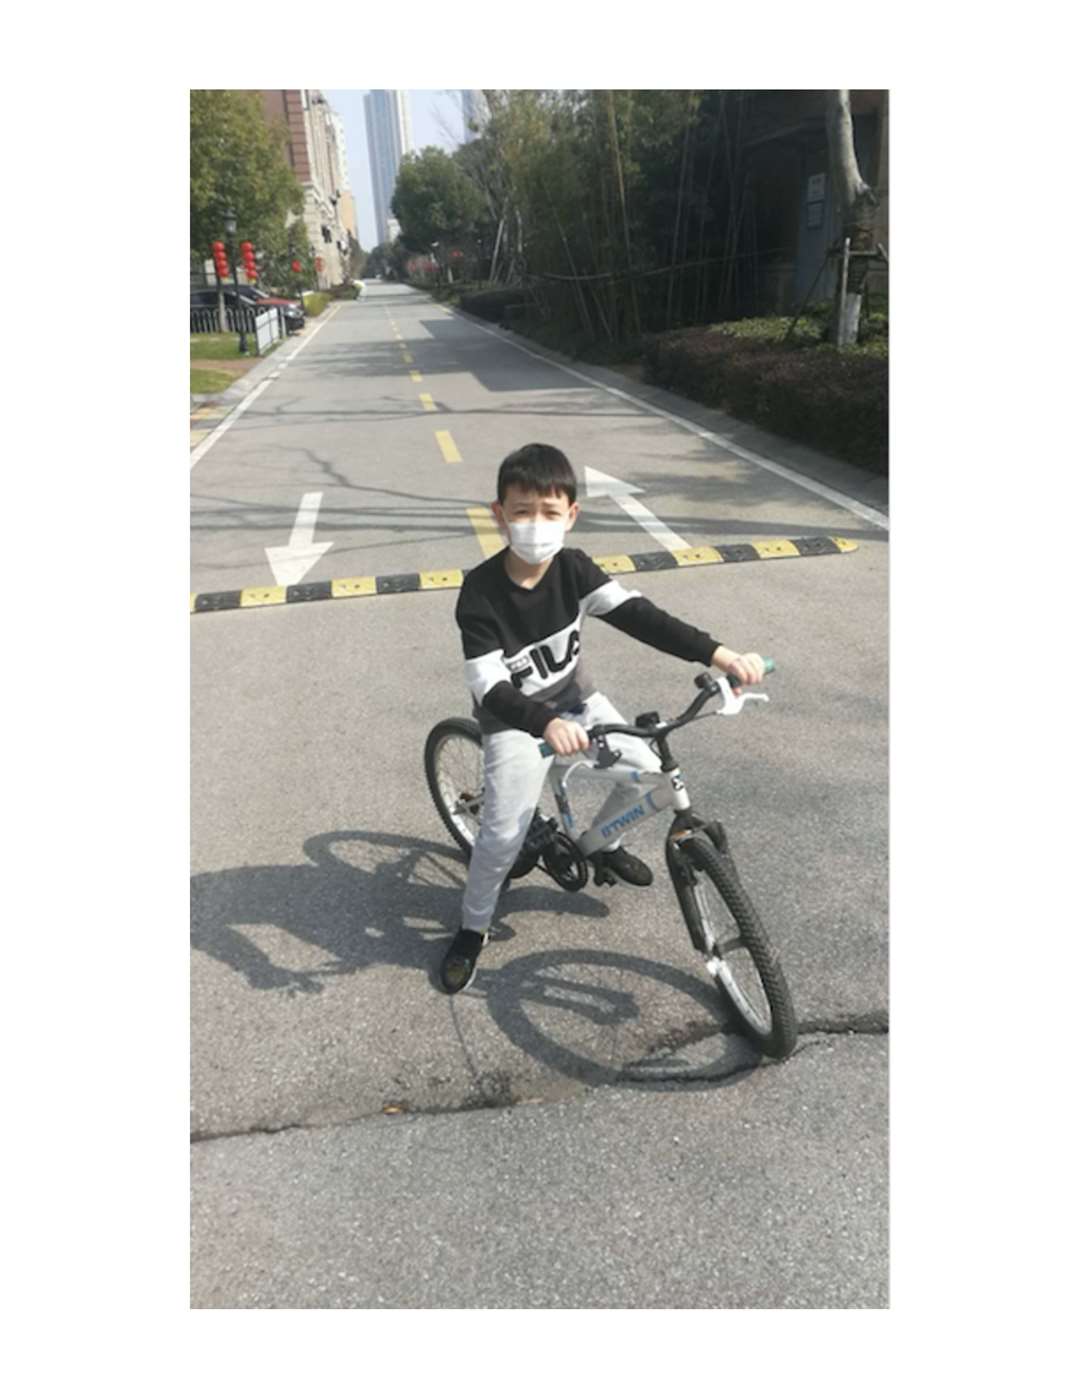 Connor enjoyed cycling on Suzhou's deserted streets when he could.